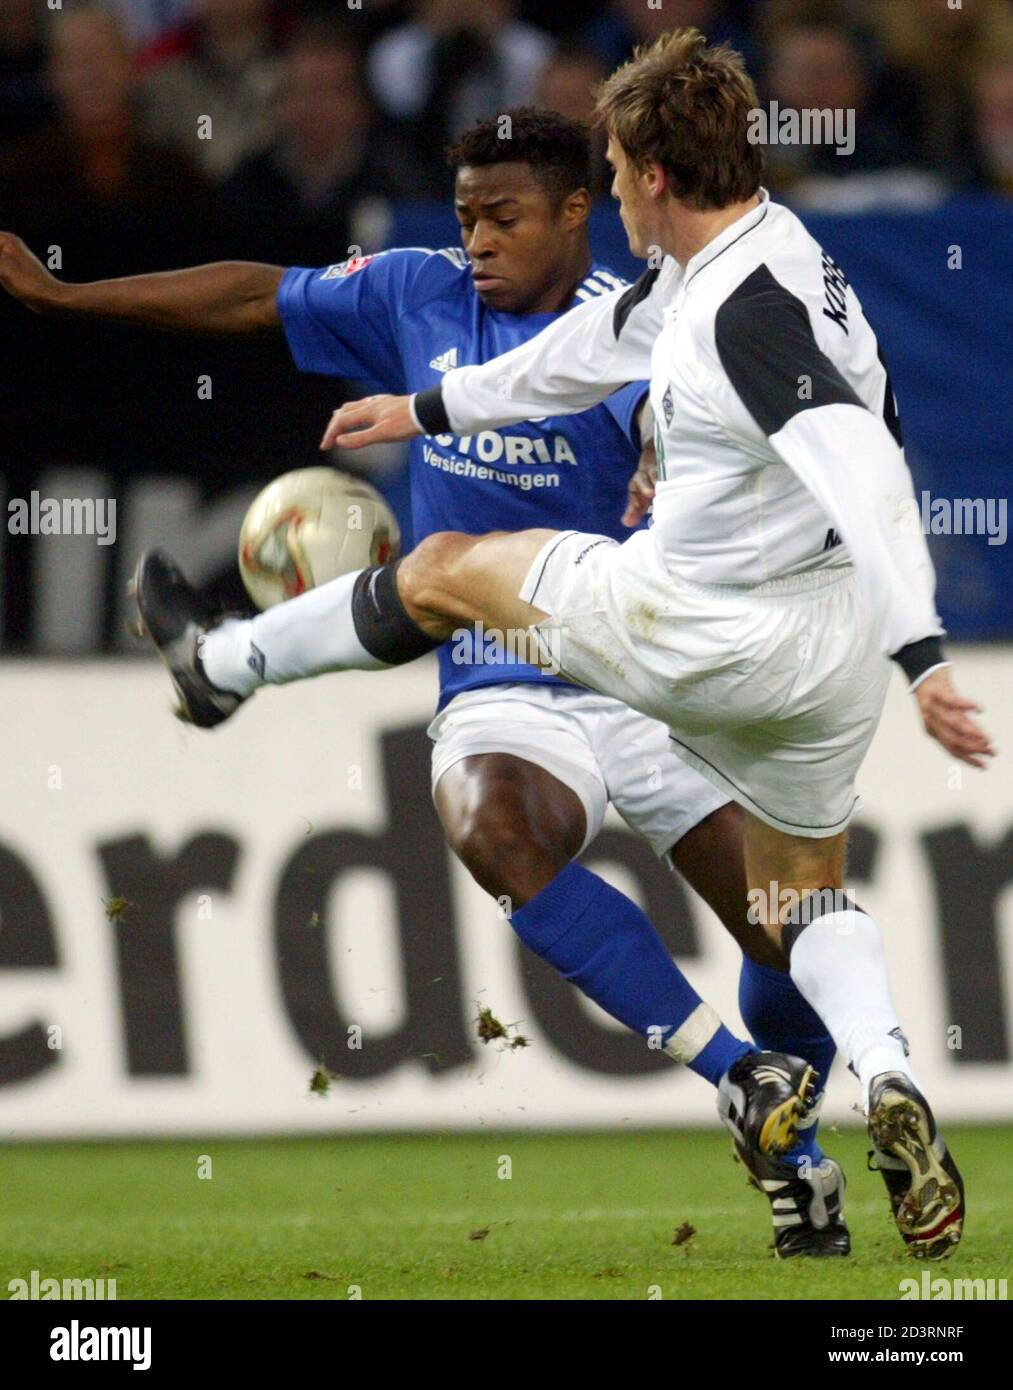 Borussia Moenchengladbach's Steffen Korell (R) tackles FC Schalke's Emile Mpenza (L) from Belgium during a second round German soccer cup match in Gelsenkirchen October 6, 2002. REUTERS/Ina Fassbender  INA/GB Stock Photo